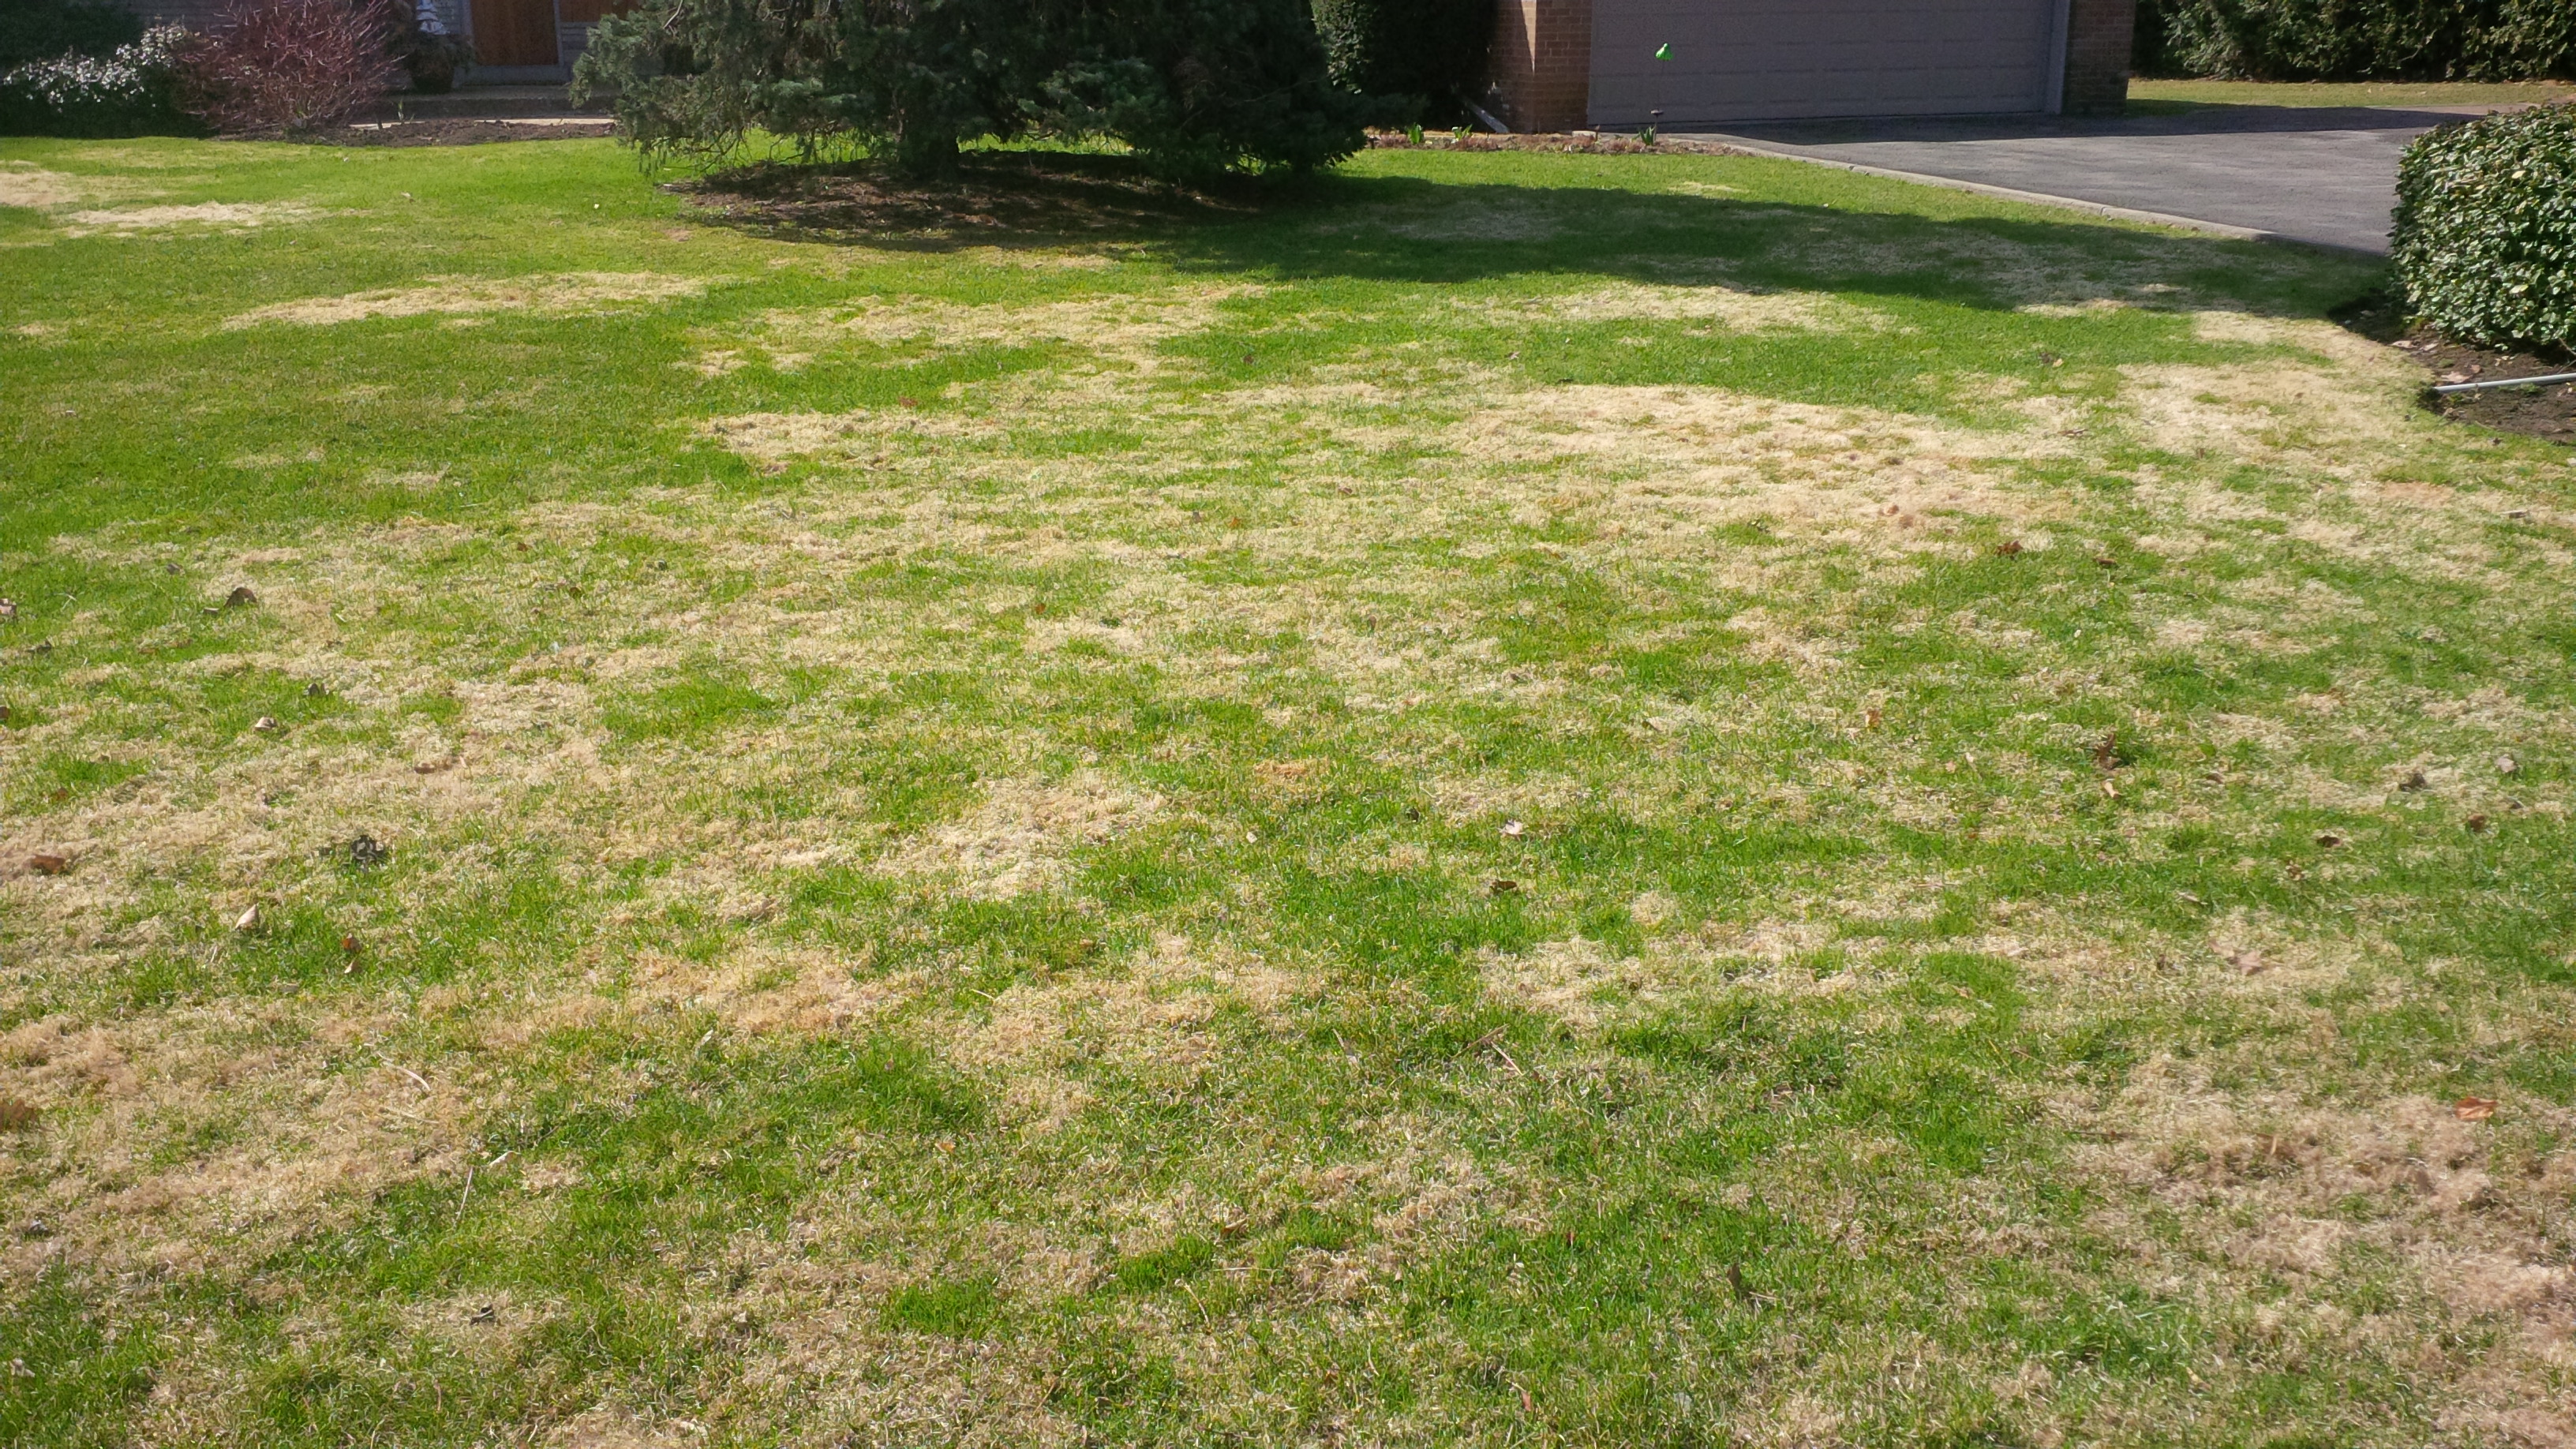 Common Lawn Problems Bentgrass Means A Slow Spring Green Up